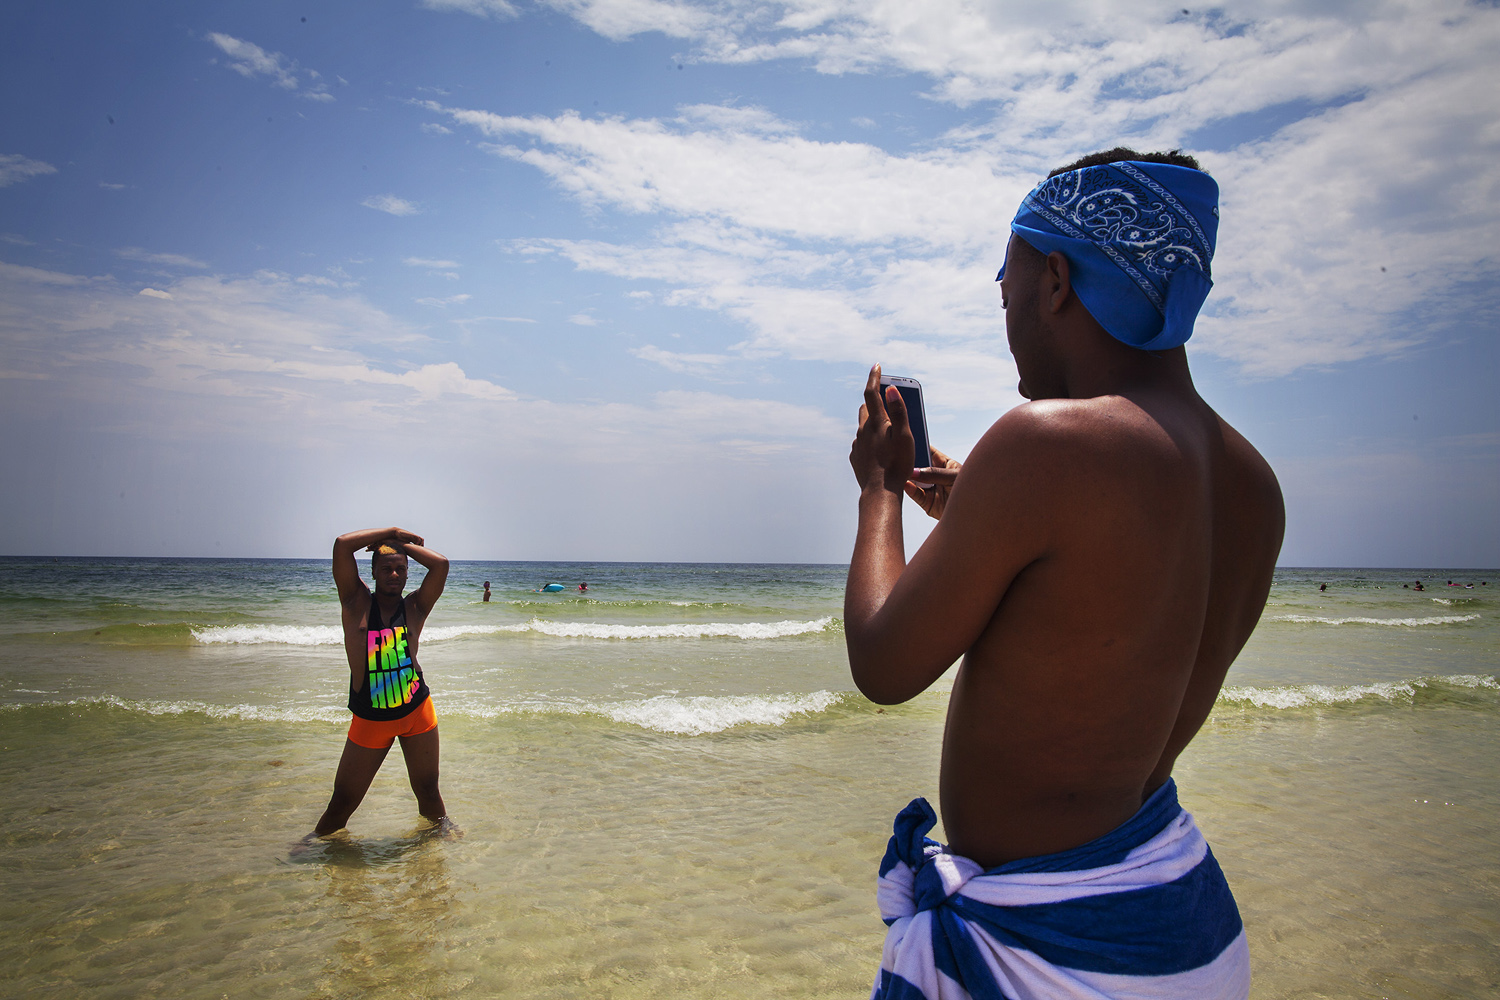 Kentrell poses for a photo on a trip to the beach with teammate Jerel. The two have emerged as leaders and role models in the group. Kentrell, as team captain, holds a great deal of authority, but Jerel, who the group also refers to as  the mom,  often provides the kind of guidance that can often be identified as parental in nature.